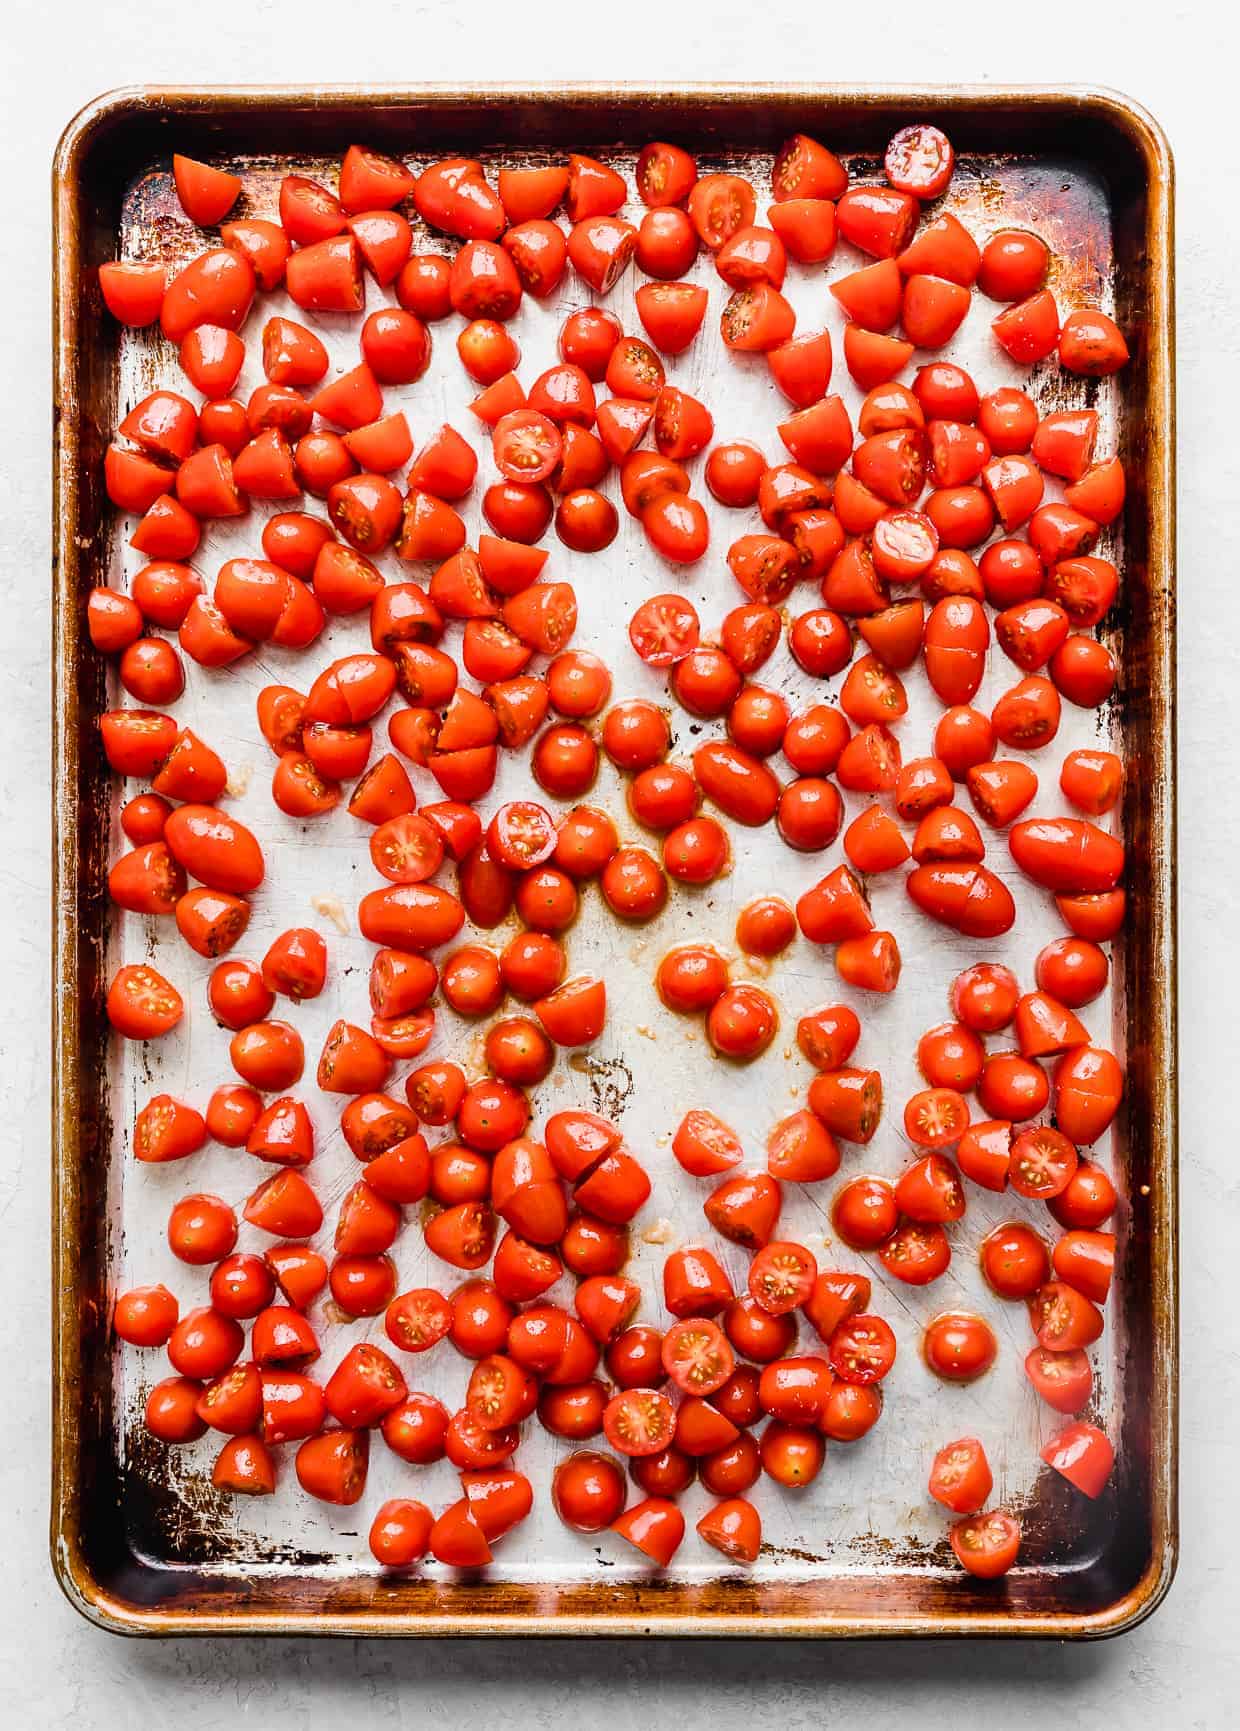 Sliced small tomatoes on a baking sheet spread into a single even layer.